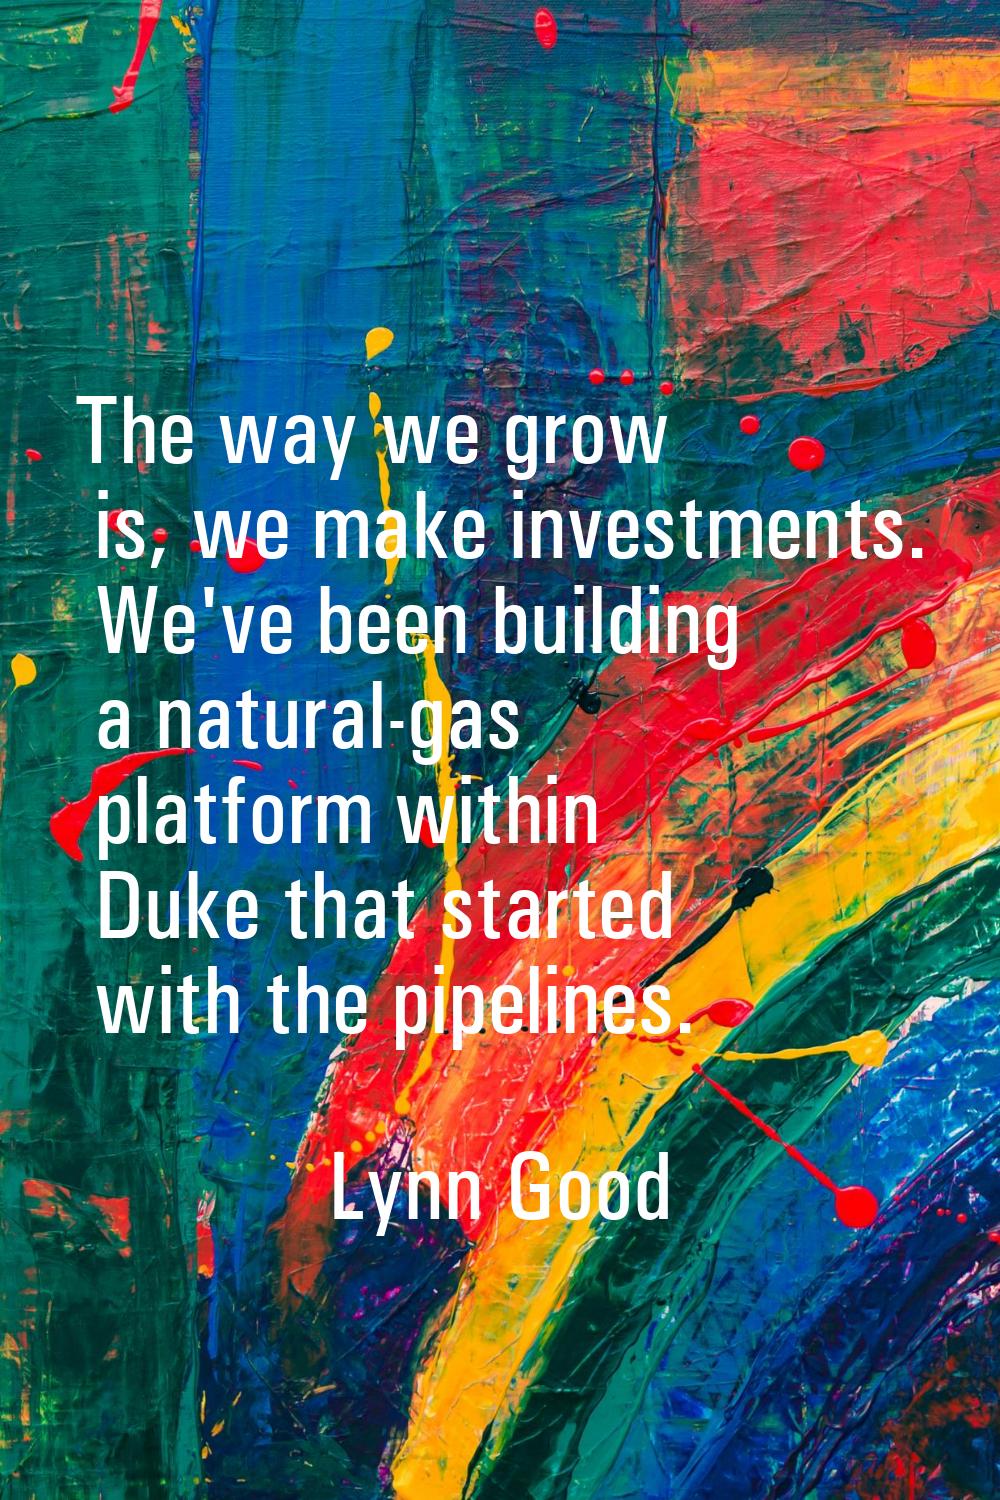 The way we grow is, we make investments. We've been building a natural-gas platform within Duke tha